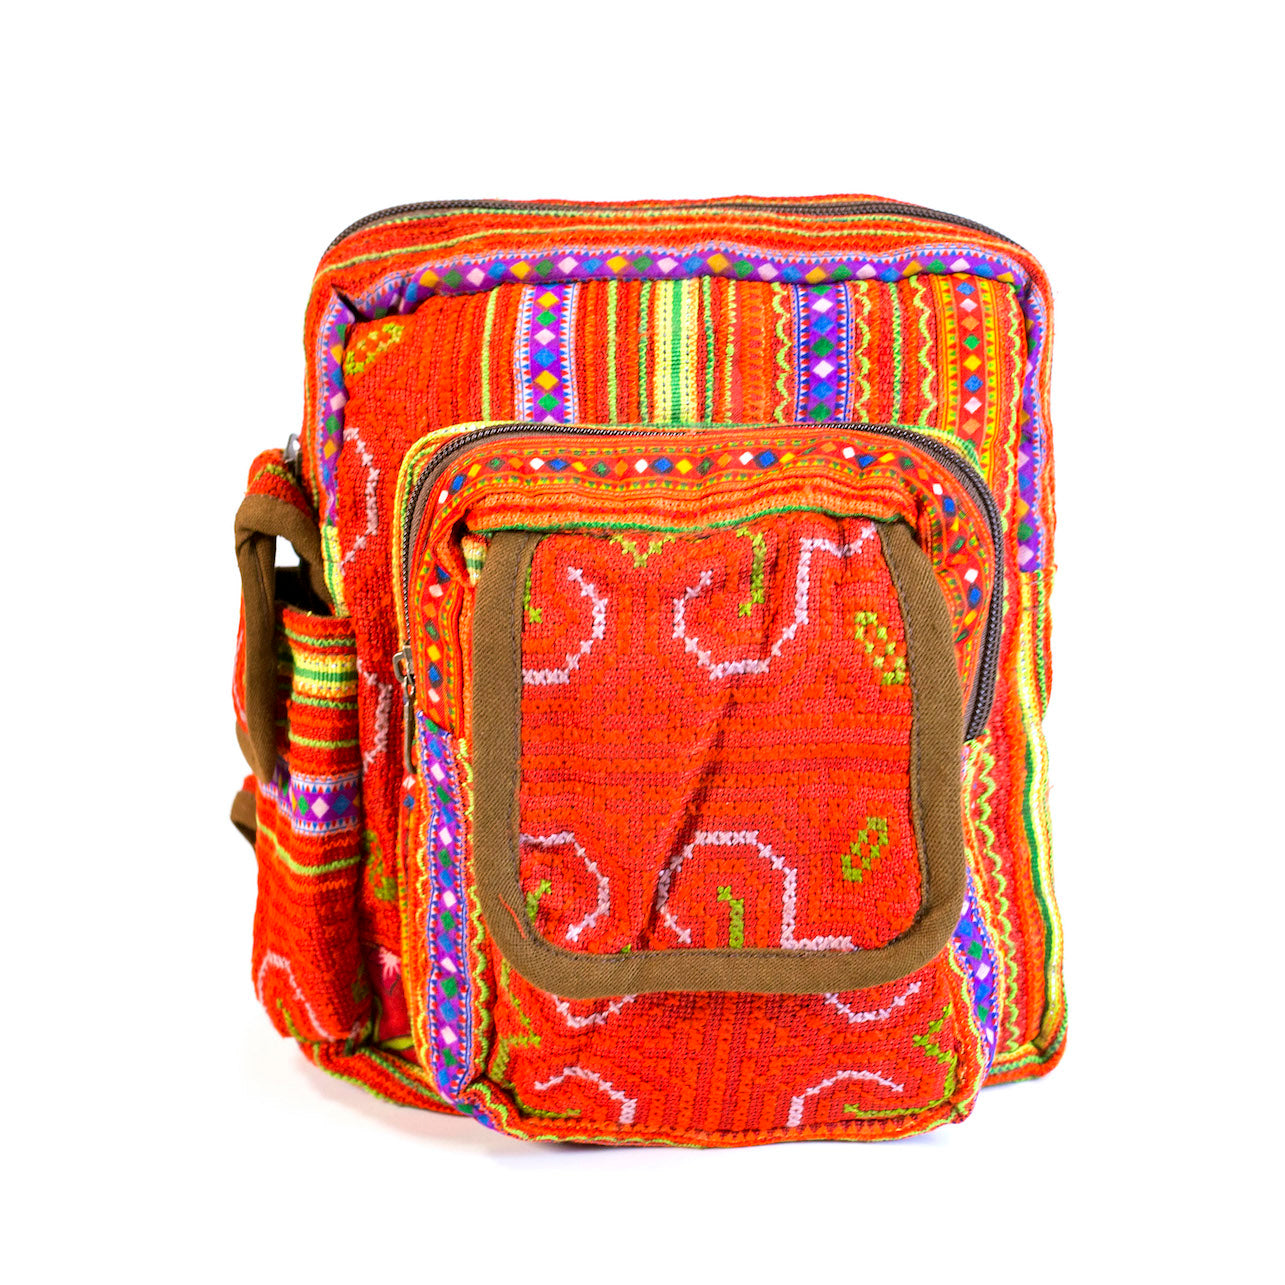 Boho-style linen, embroidery Sling bag, H'mong tribal pattern in RED silk thread